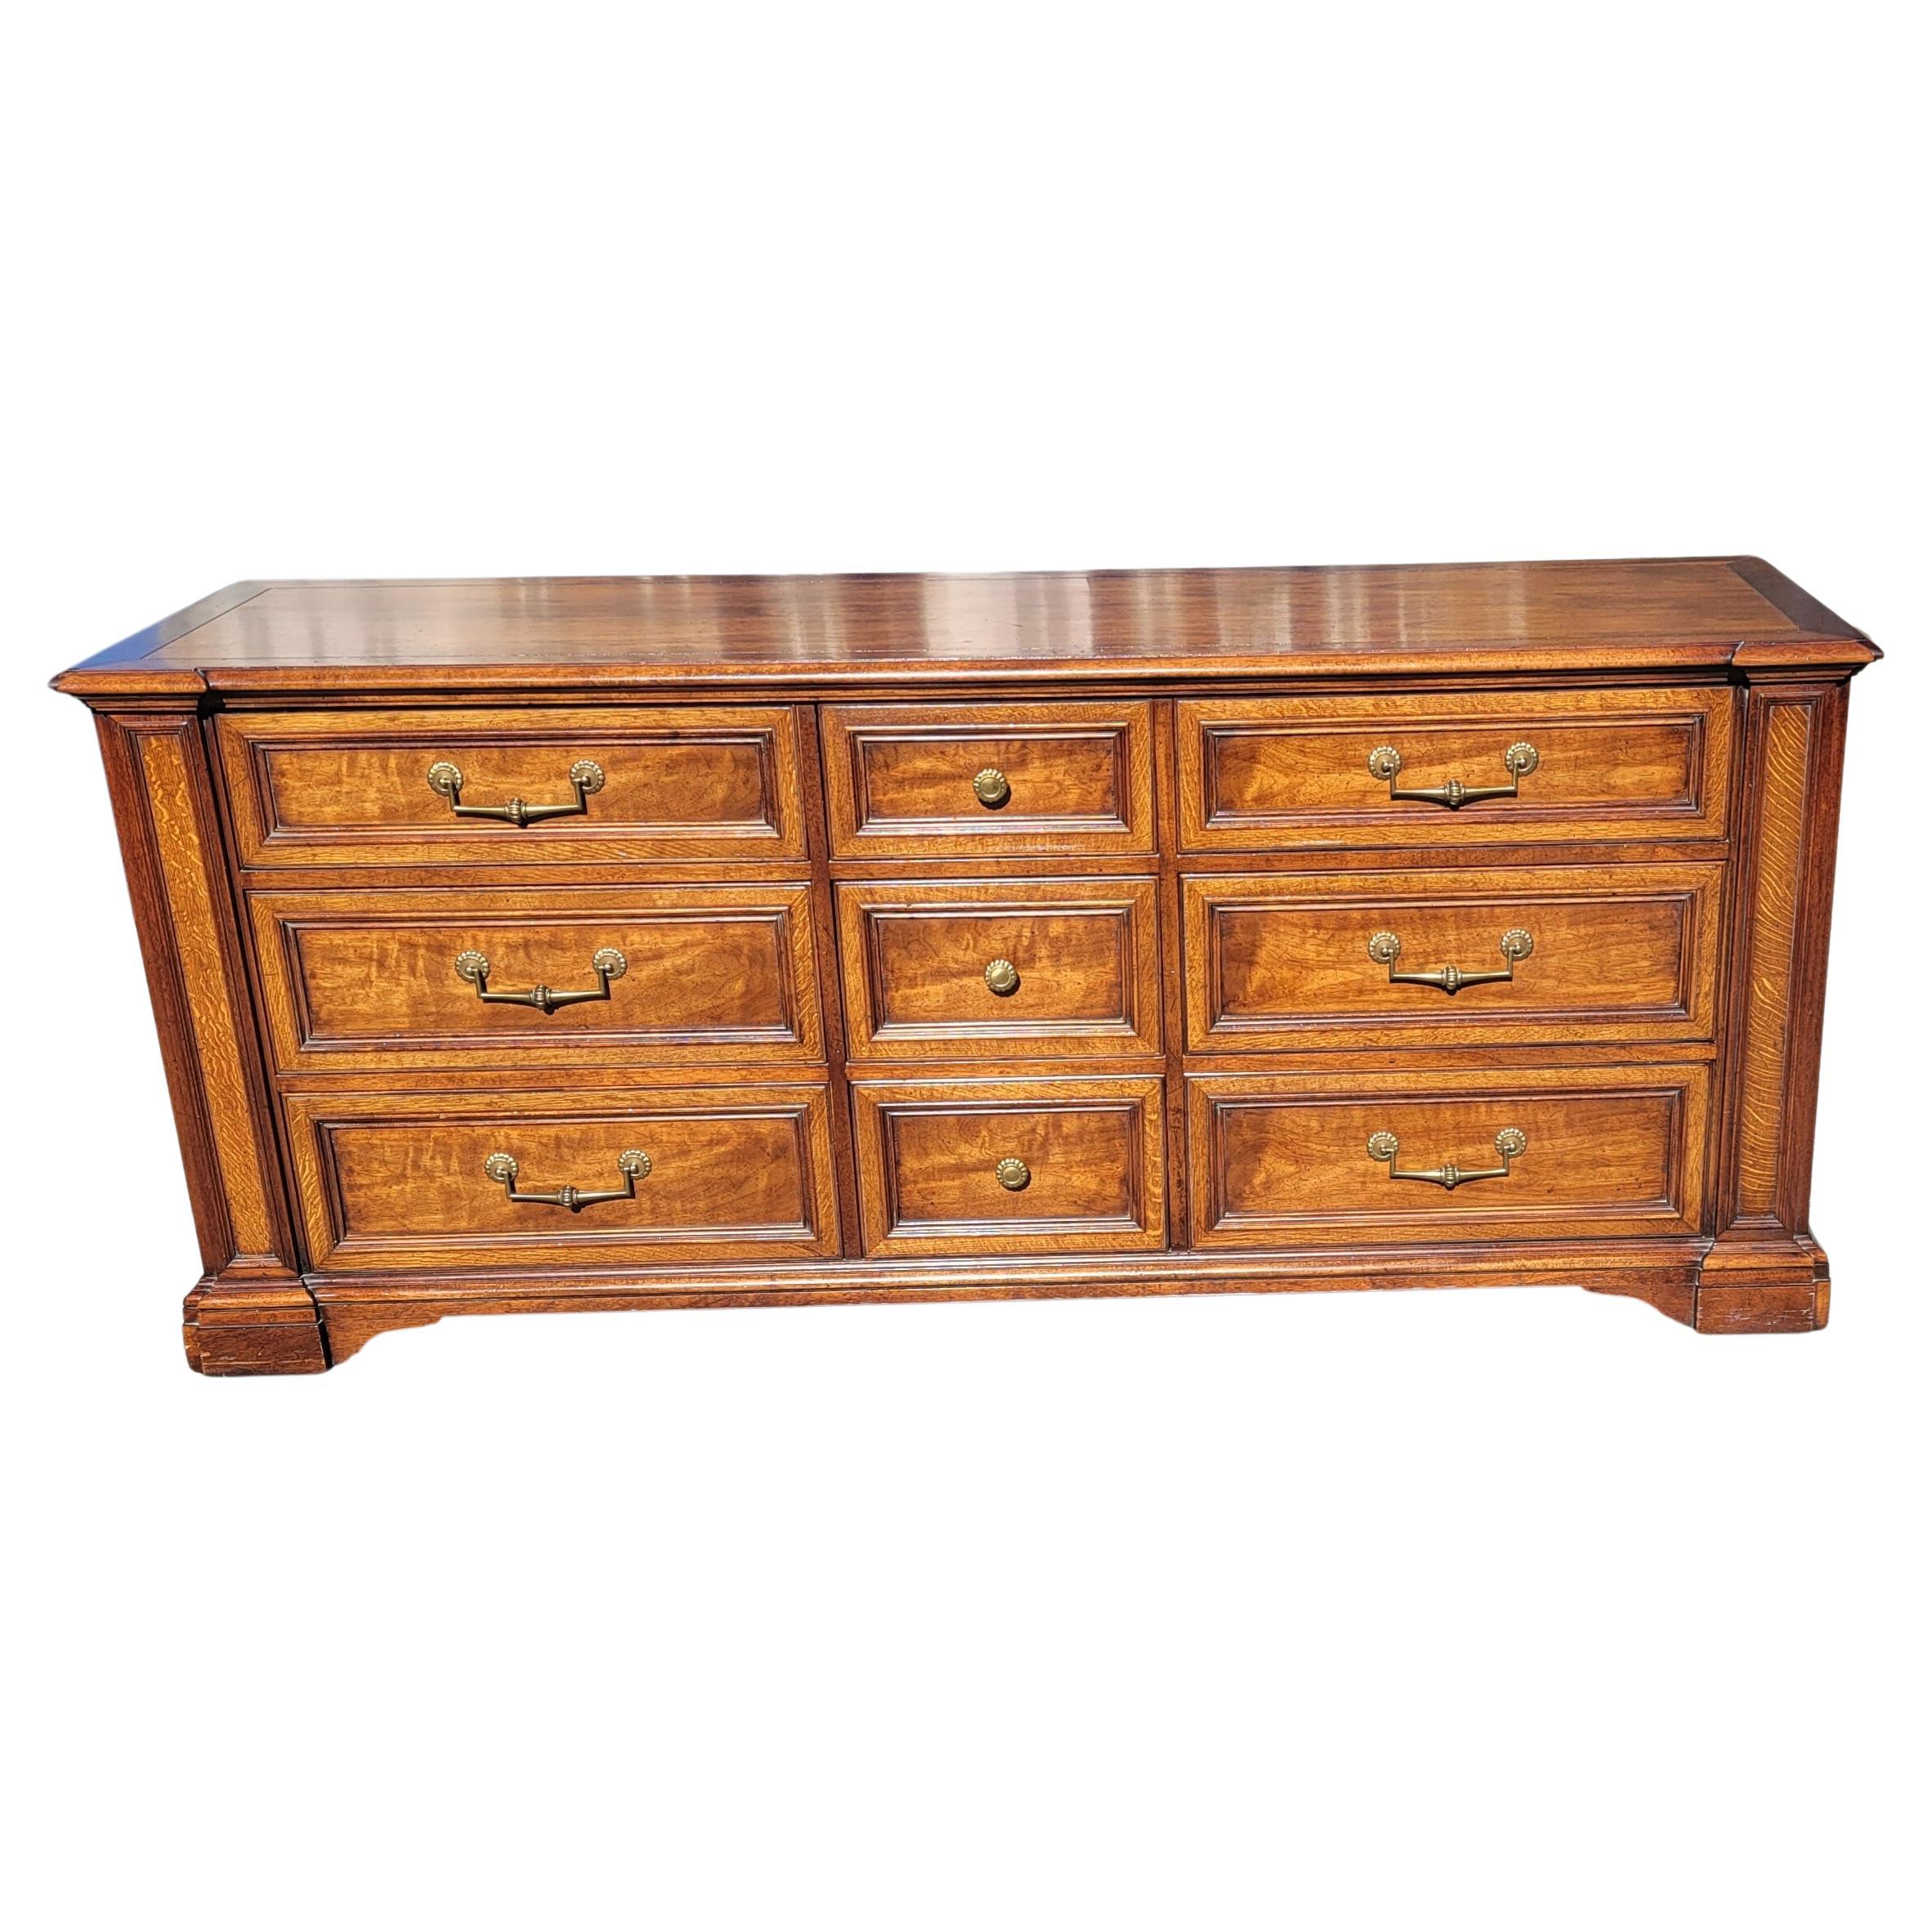 Very fine Henredon Fine Furniture 9-drawer triple dresser in great condition. 
Amazing combination of Solid walnut and mission oak construction. Dovetailed joinery drawers. Top drawers with dividers. Very clean in and out. on wheels
Measures 74